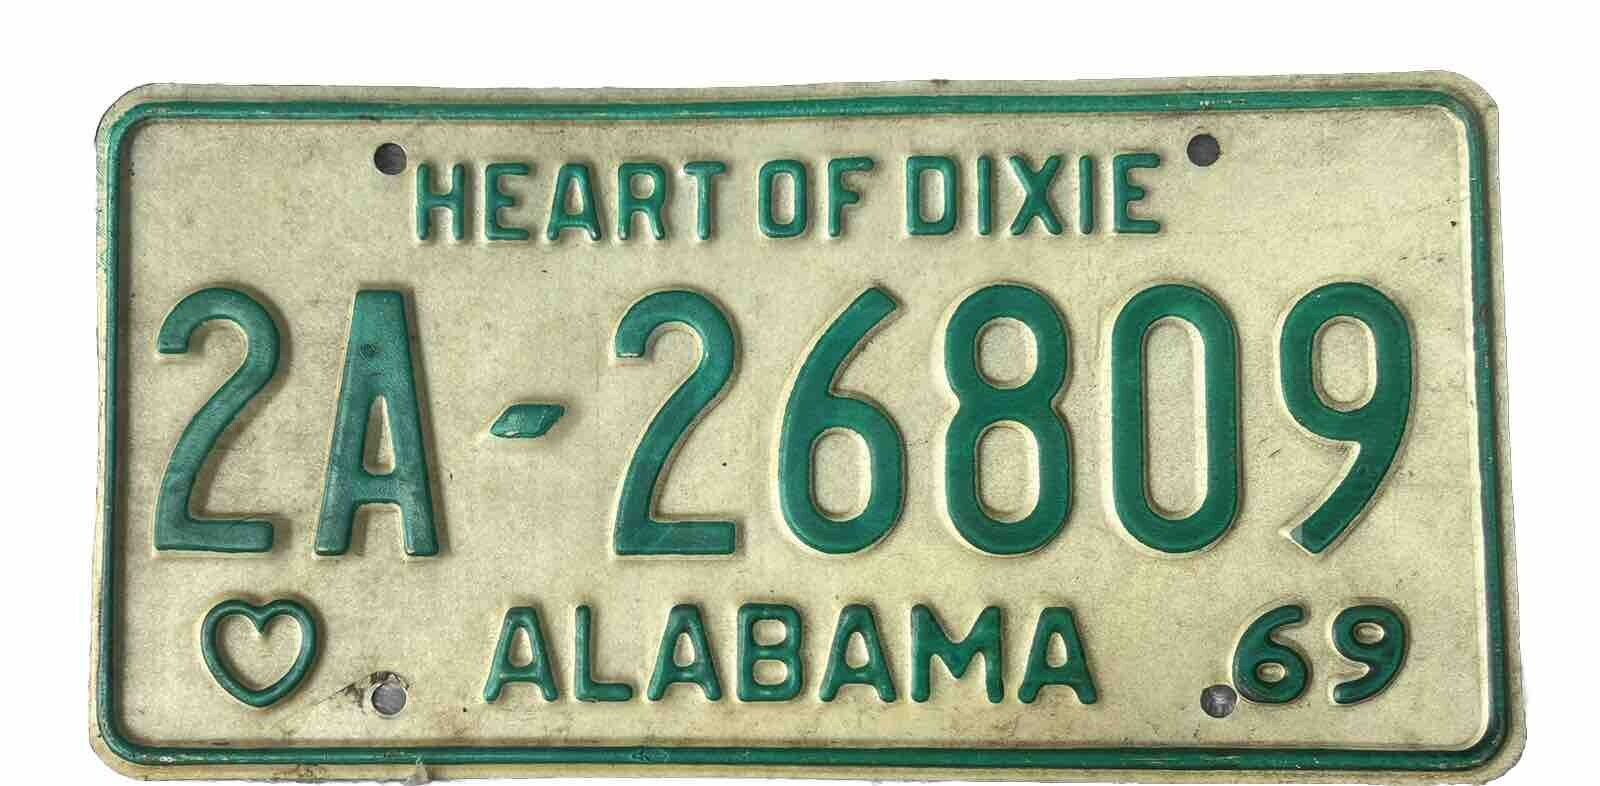 Alabama 1969 Vintage License Plate Mobile County Heart Of Dixie